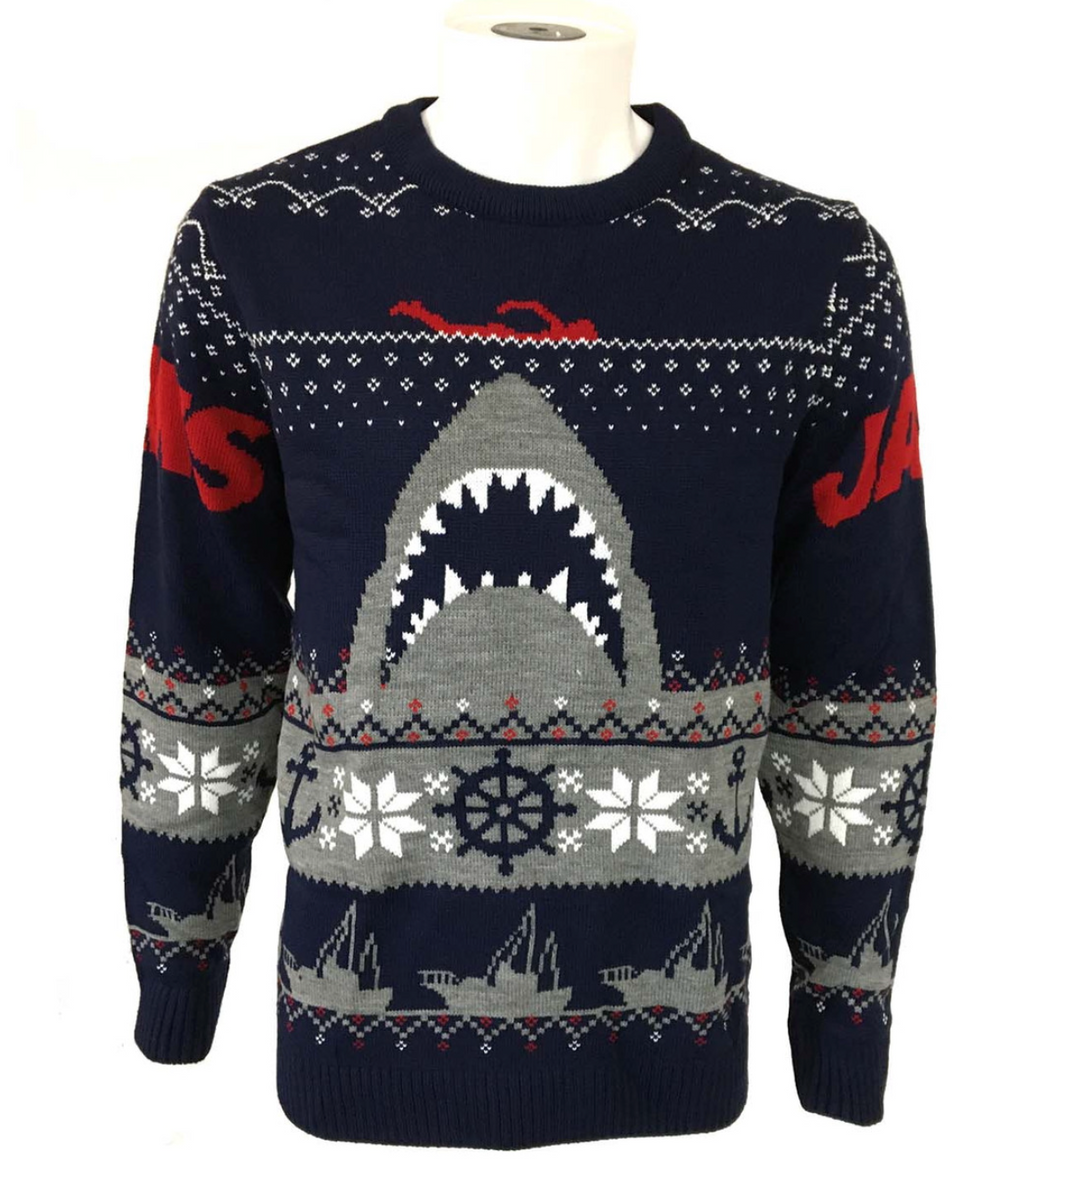 Official Jaws Knitted Unisex Christmas Jumper